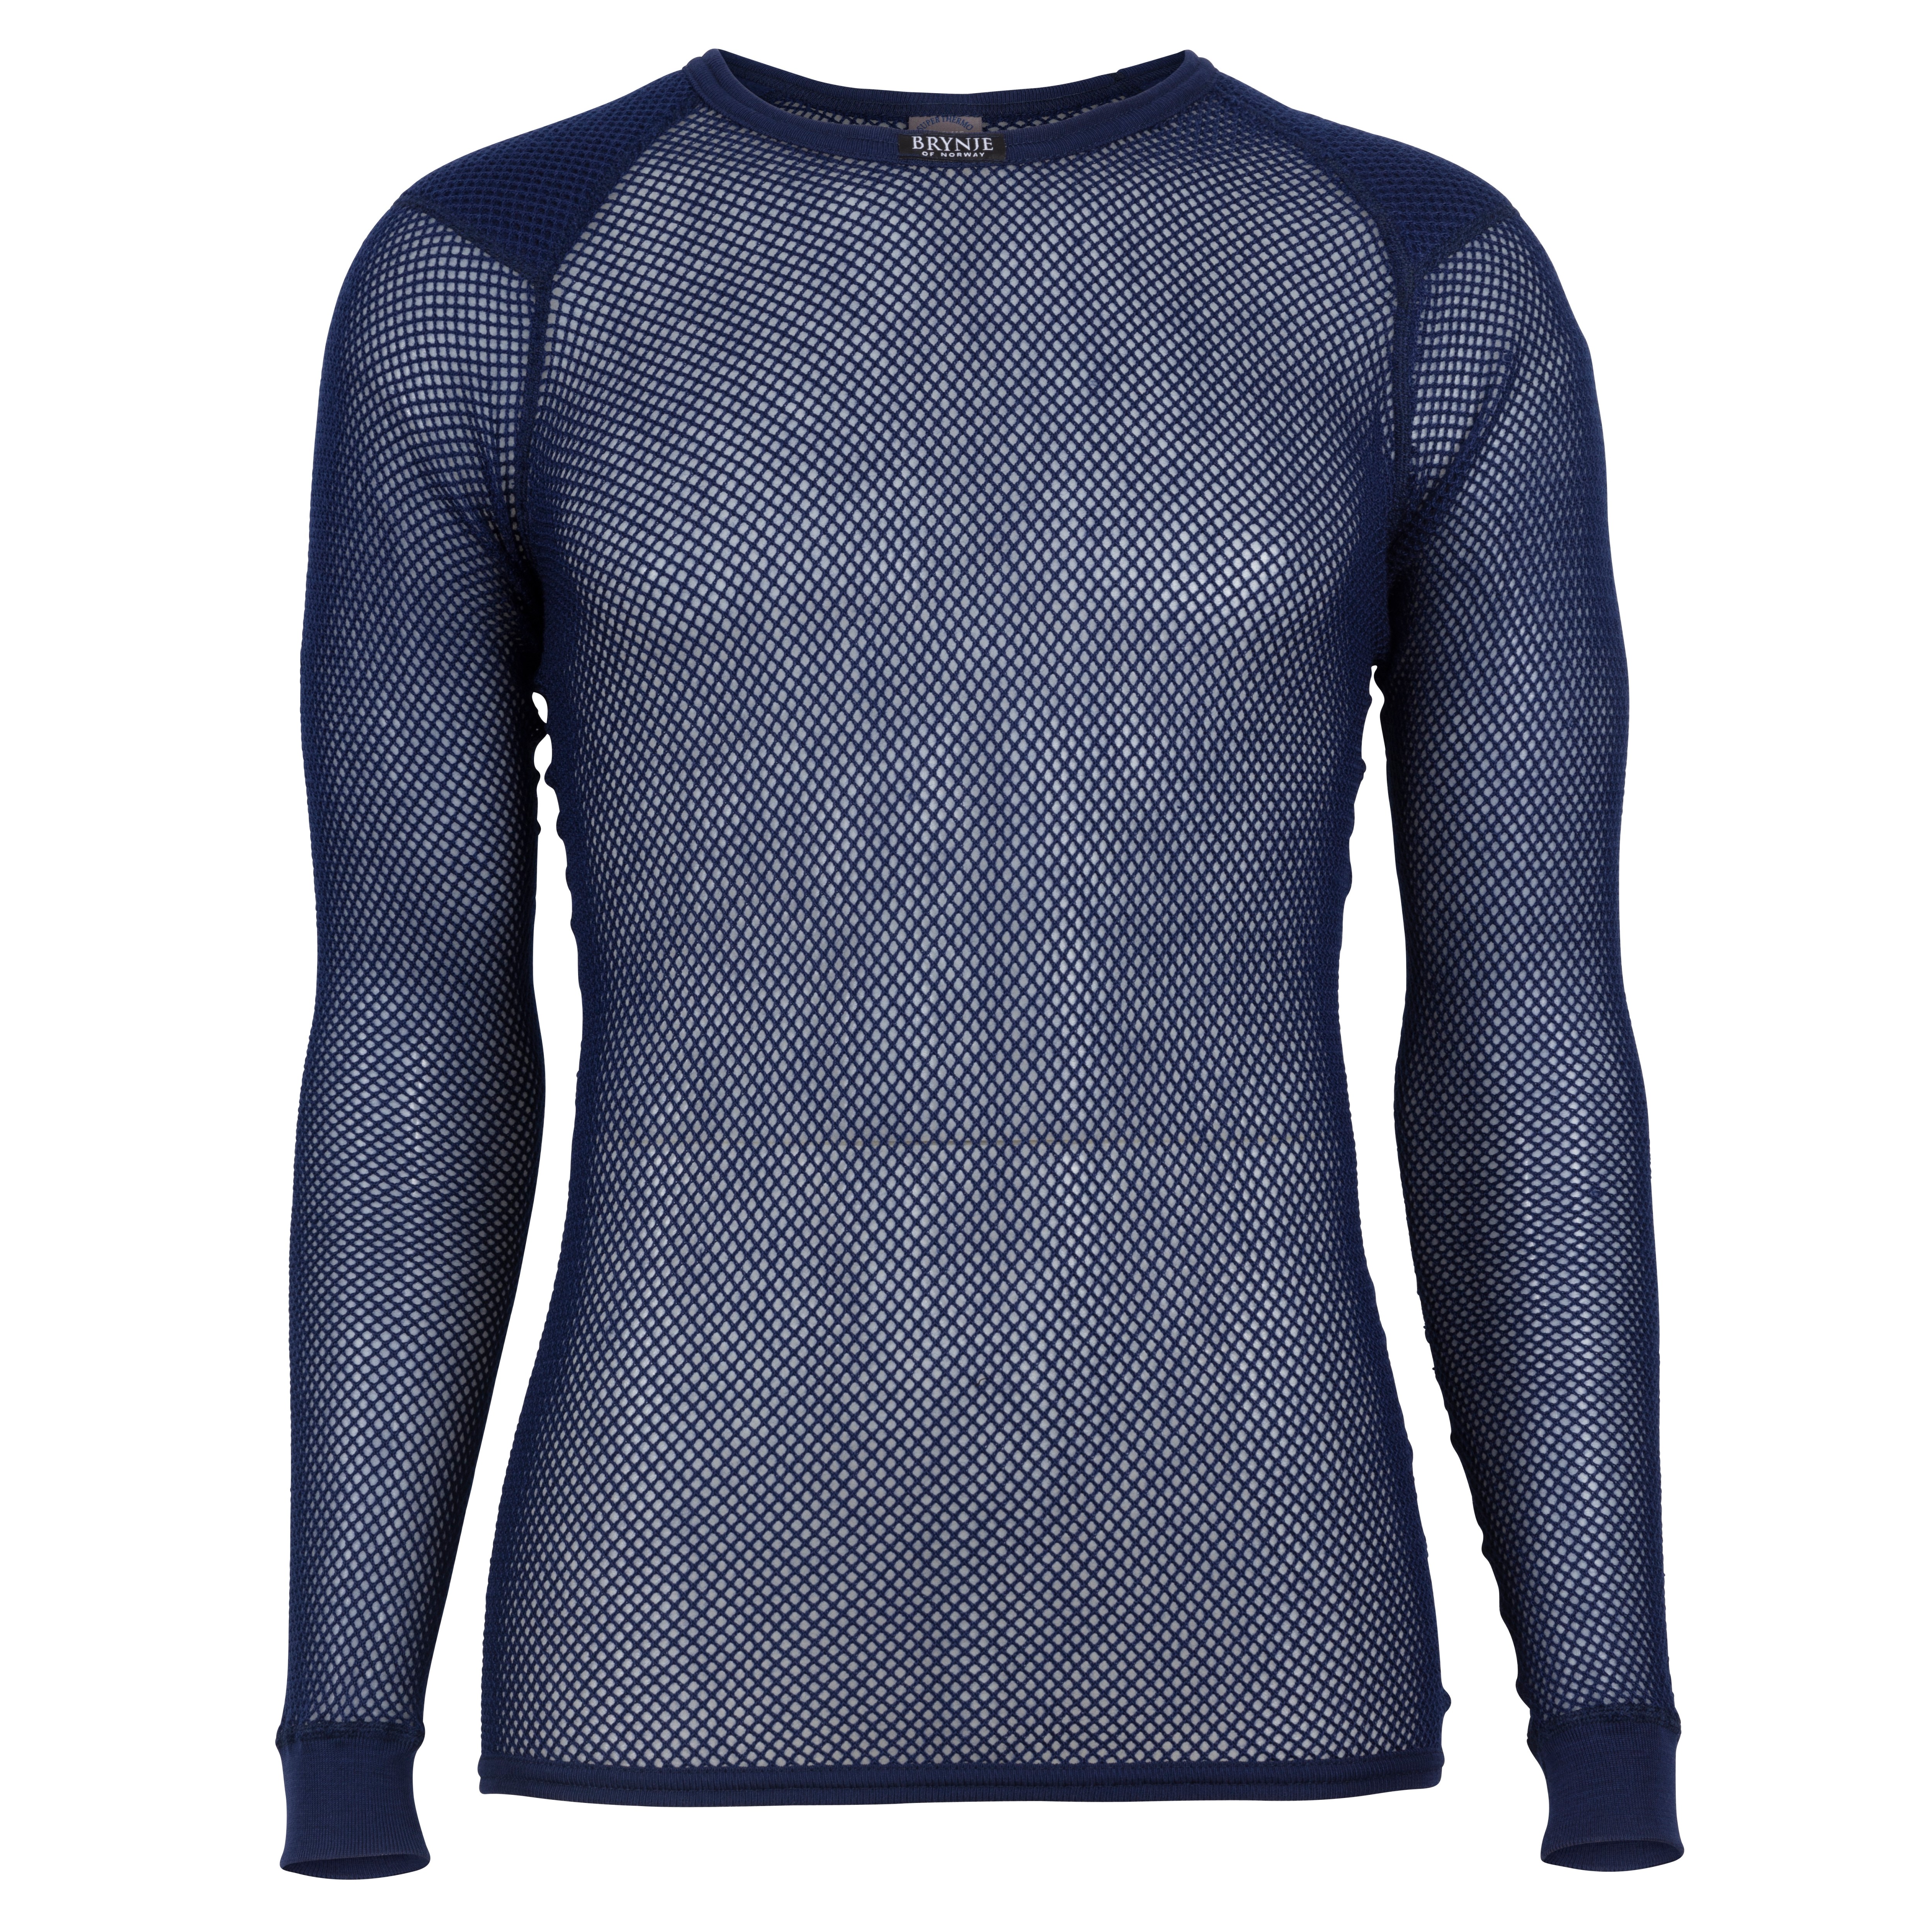 Unisex Super Thermo Shirt with Shoulder Inlay Navy